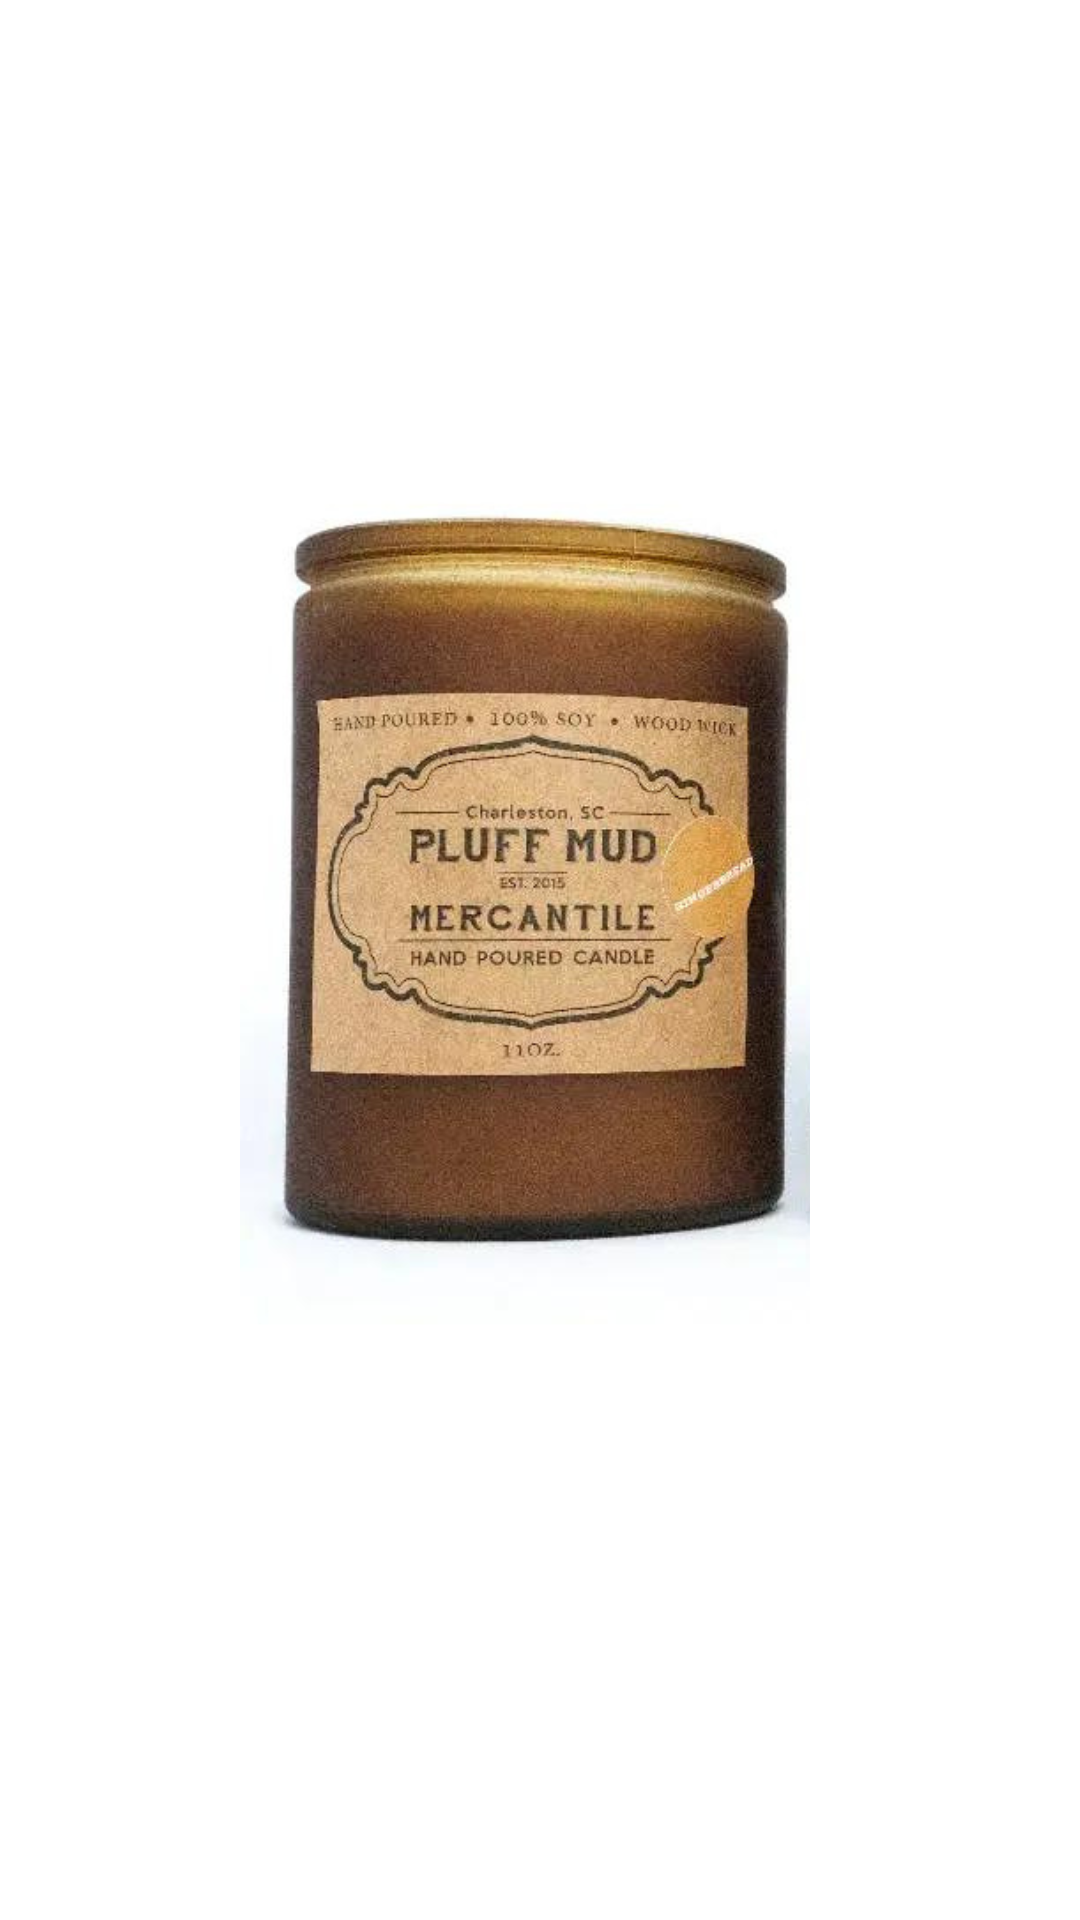 Baked Apple Hand Poured Soy Candle - Pluff Mud Mercantile